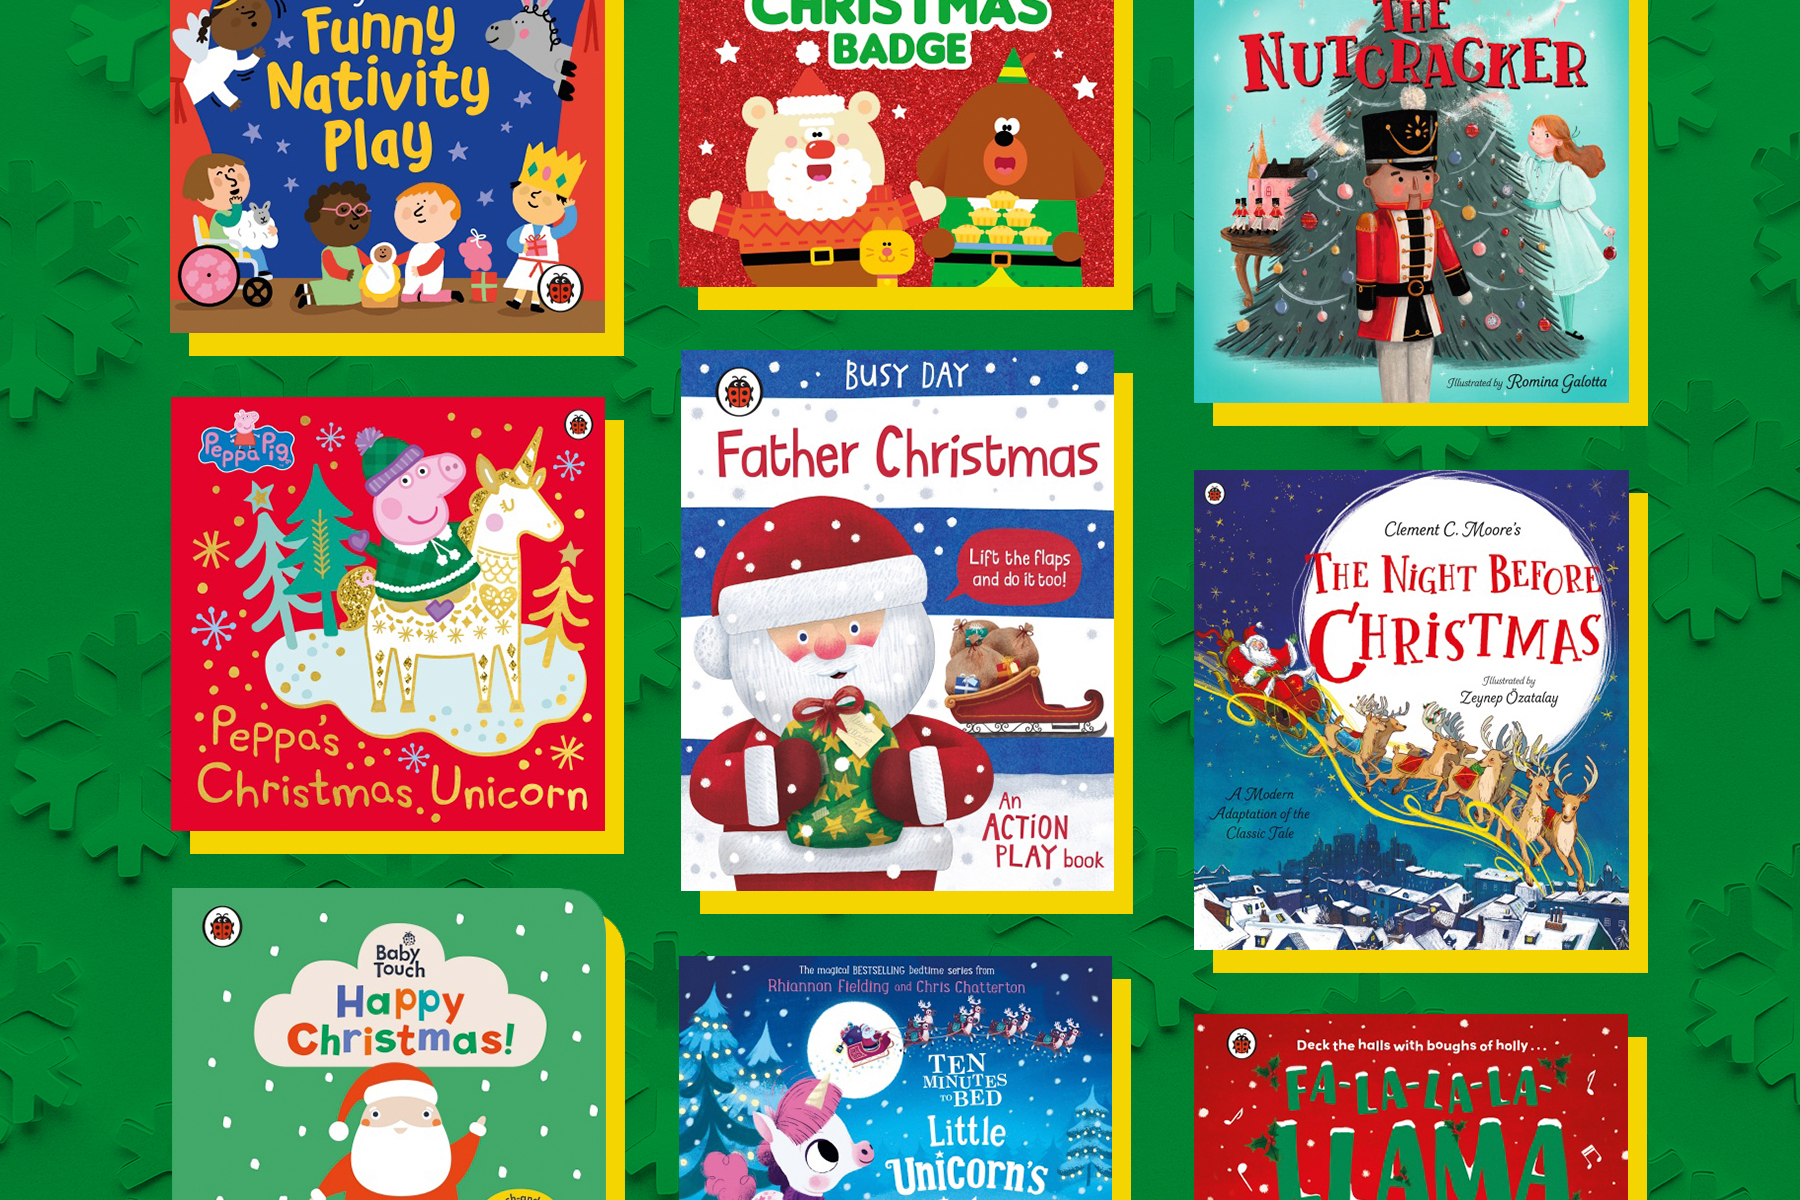 A picture of a selection of Christmas-themed children's books against a green background with cut-out snowflakes